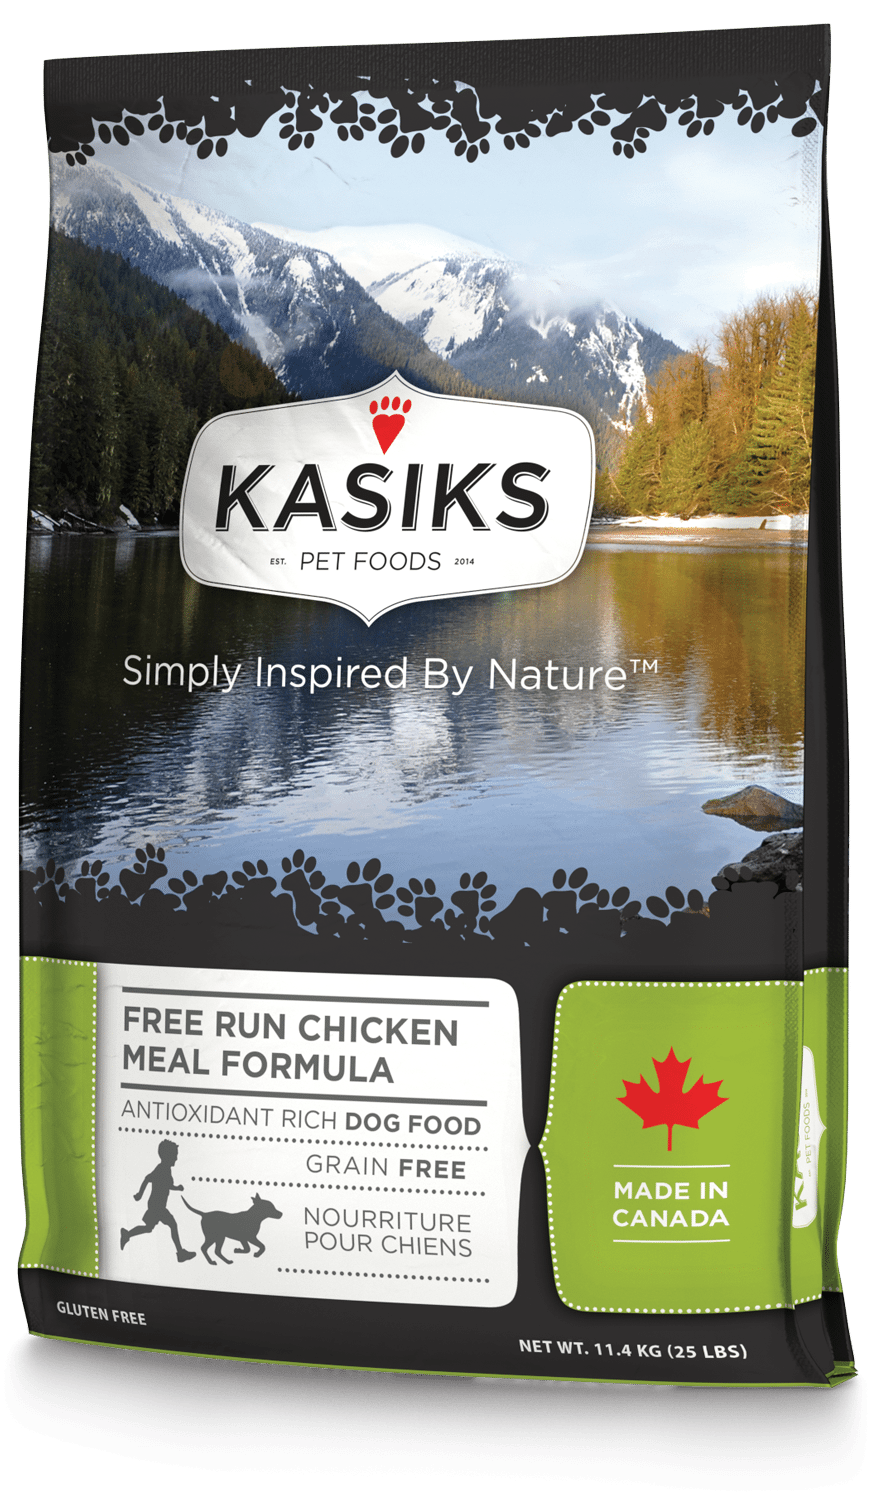 KASIKS Dog Food - GRAIN FREE and GLUTEN FREE for All Life Stages